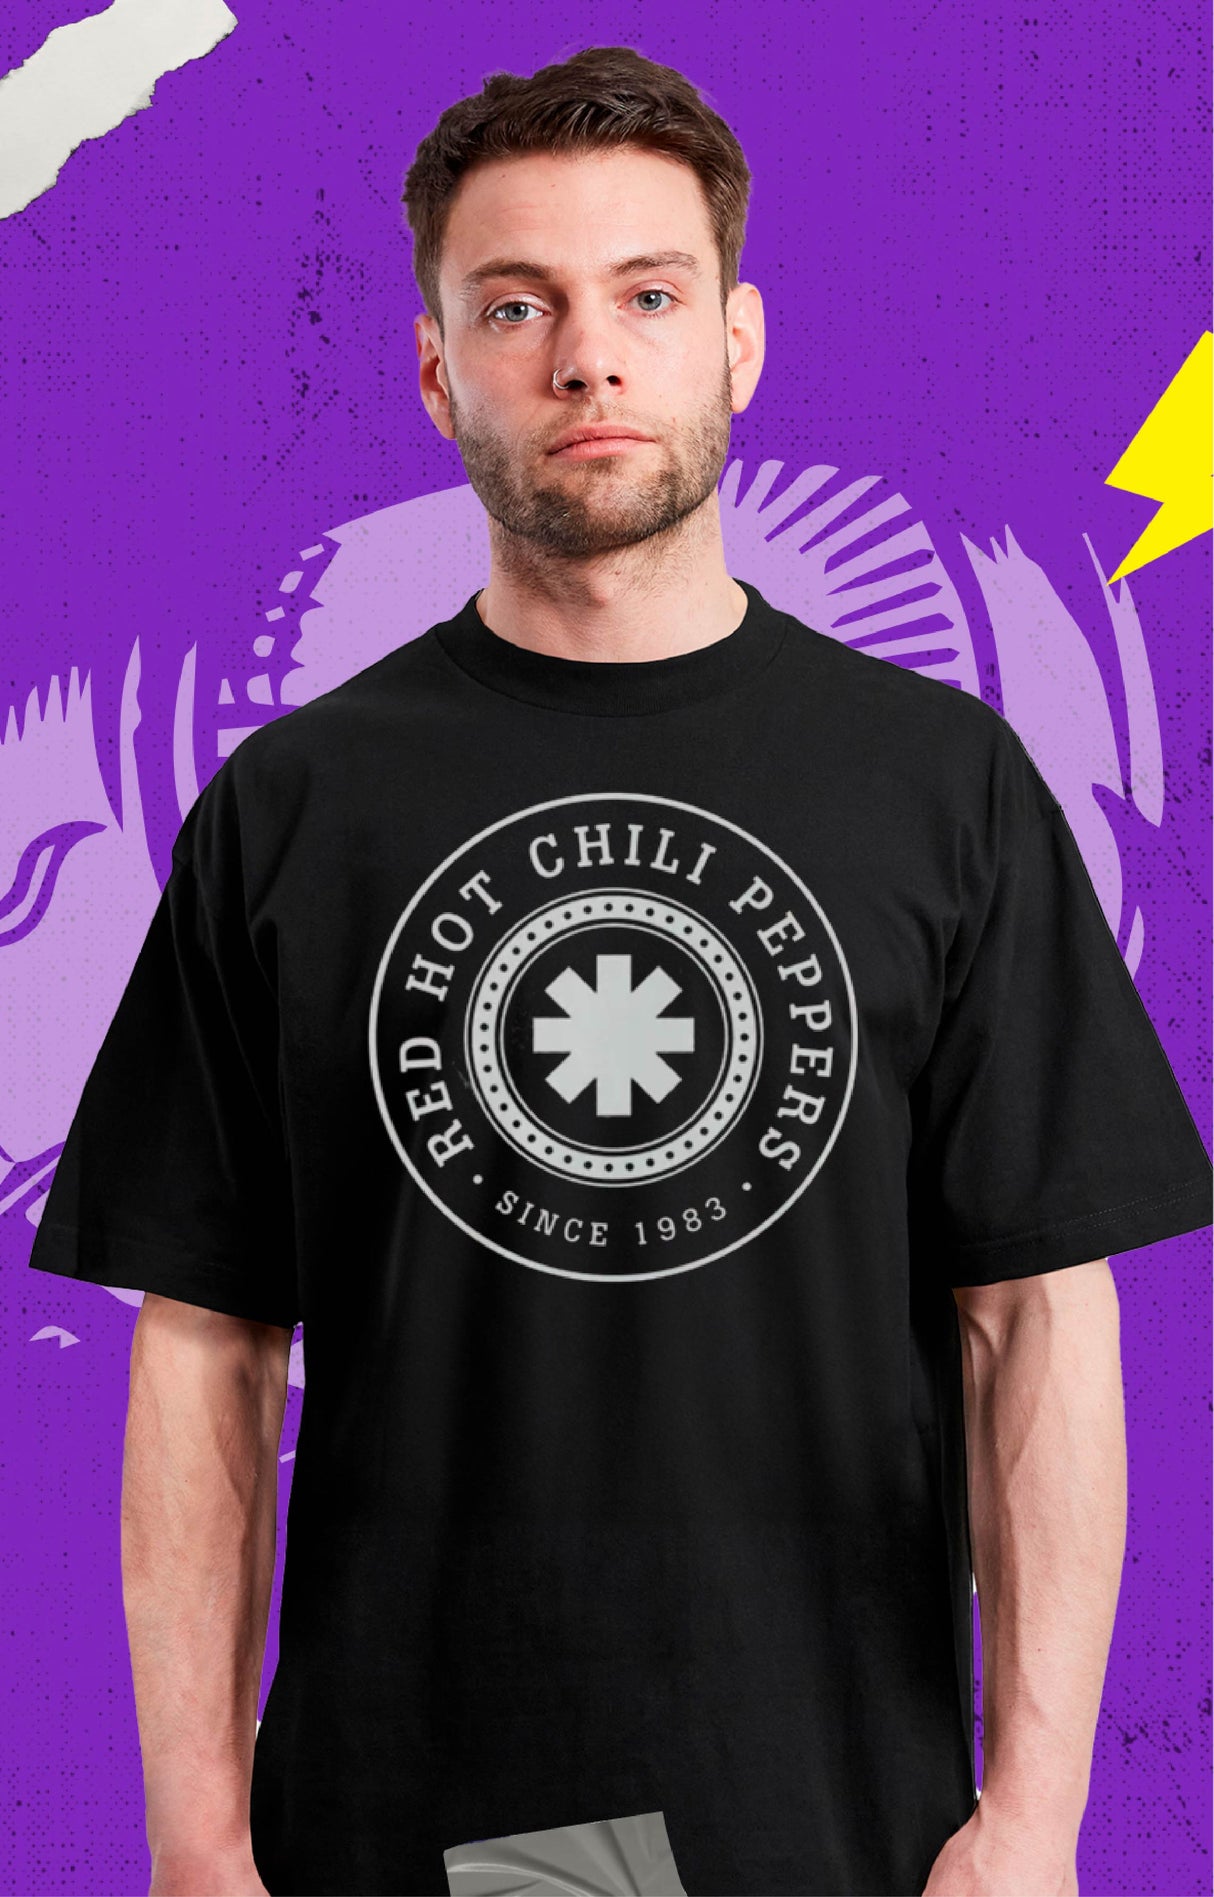 Red Hot Chili Peppers - Since 1983 Logo - Polera